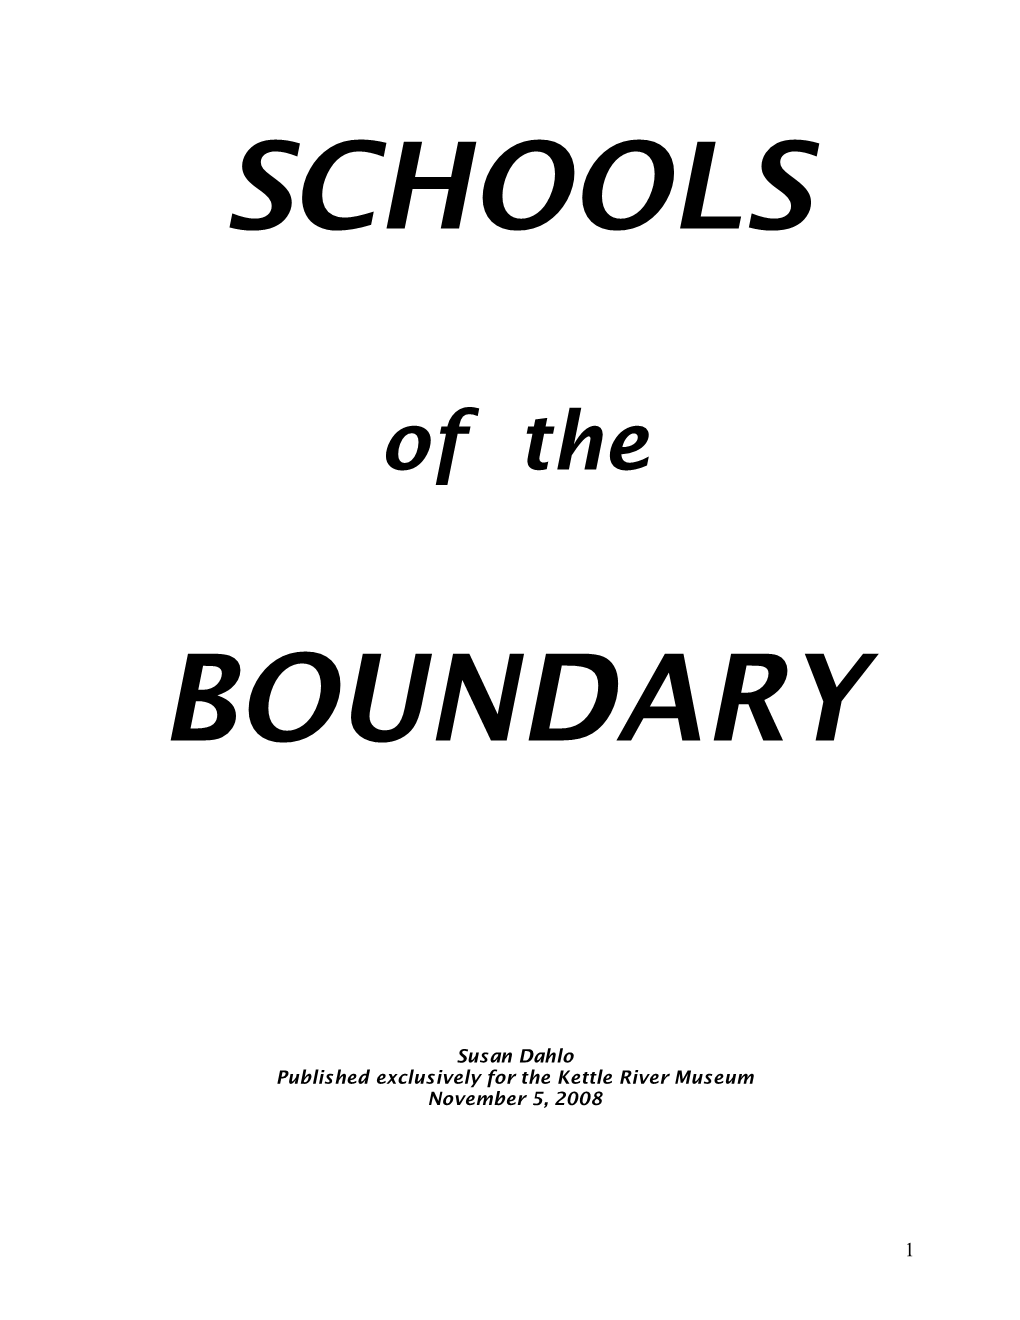 Schools of the Boundary 1891- 1991” in 1991